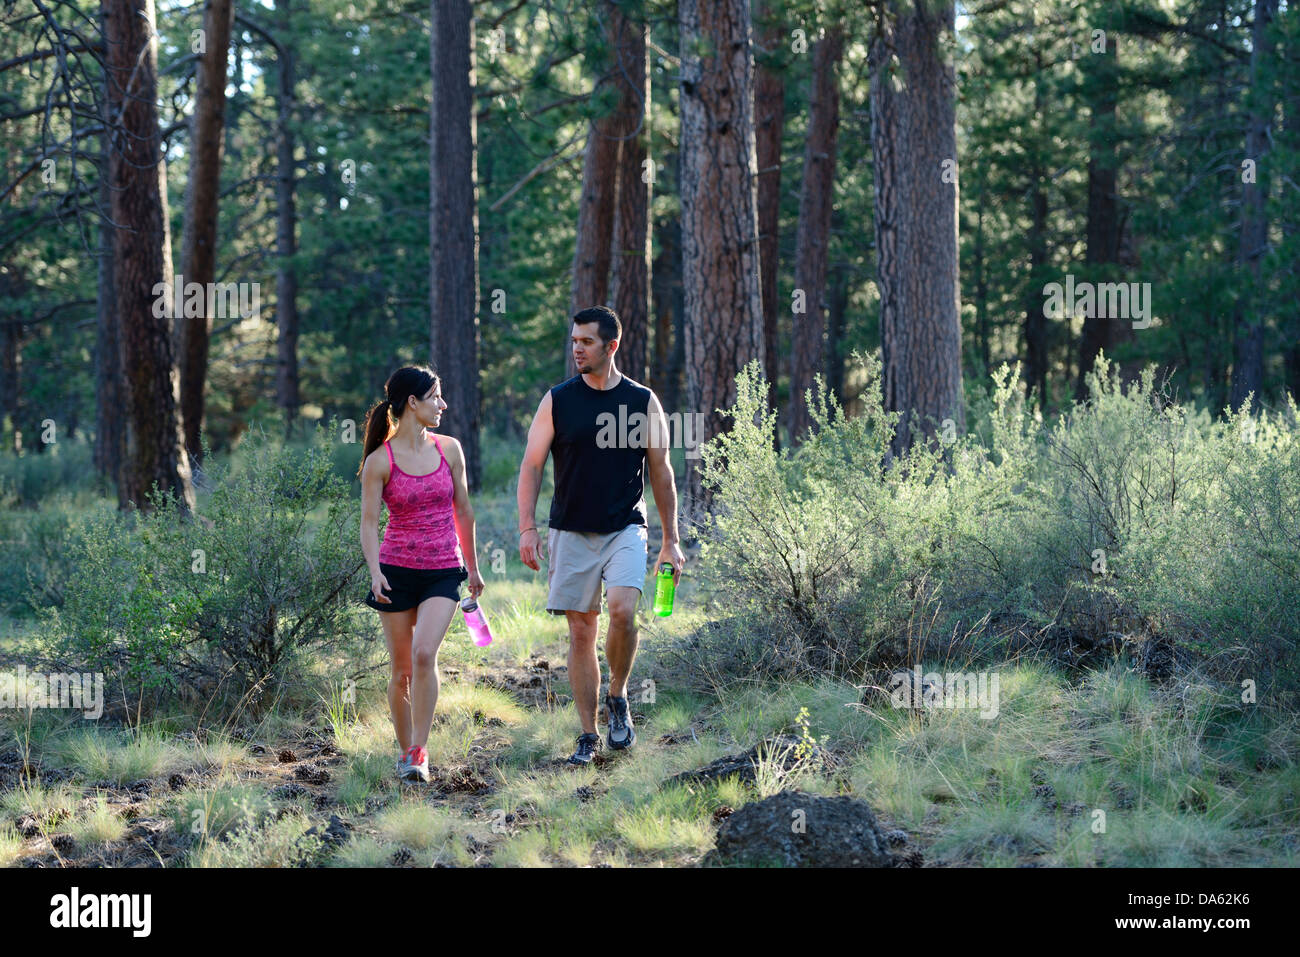 USA, United States, America, North America, Pacific Northwest, Oregon, Deschutes County, running, outdoor, trail, forest, couple Stock Photo